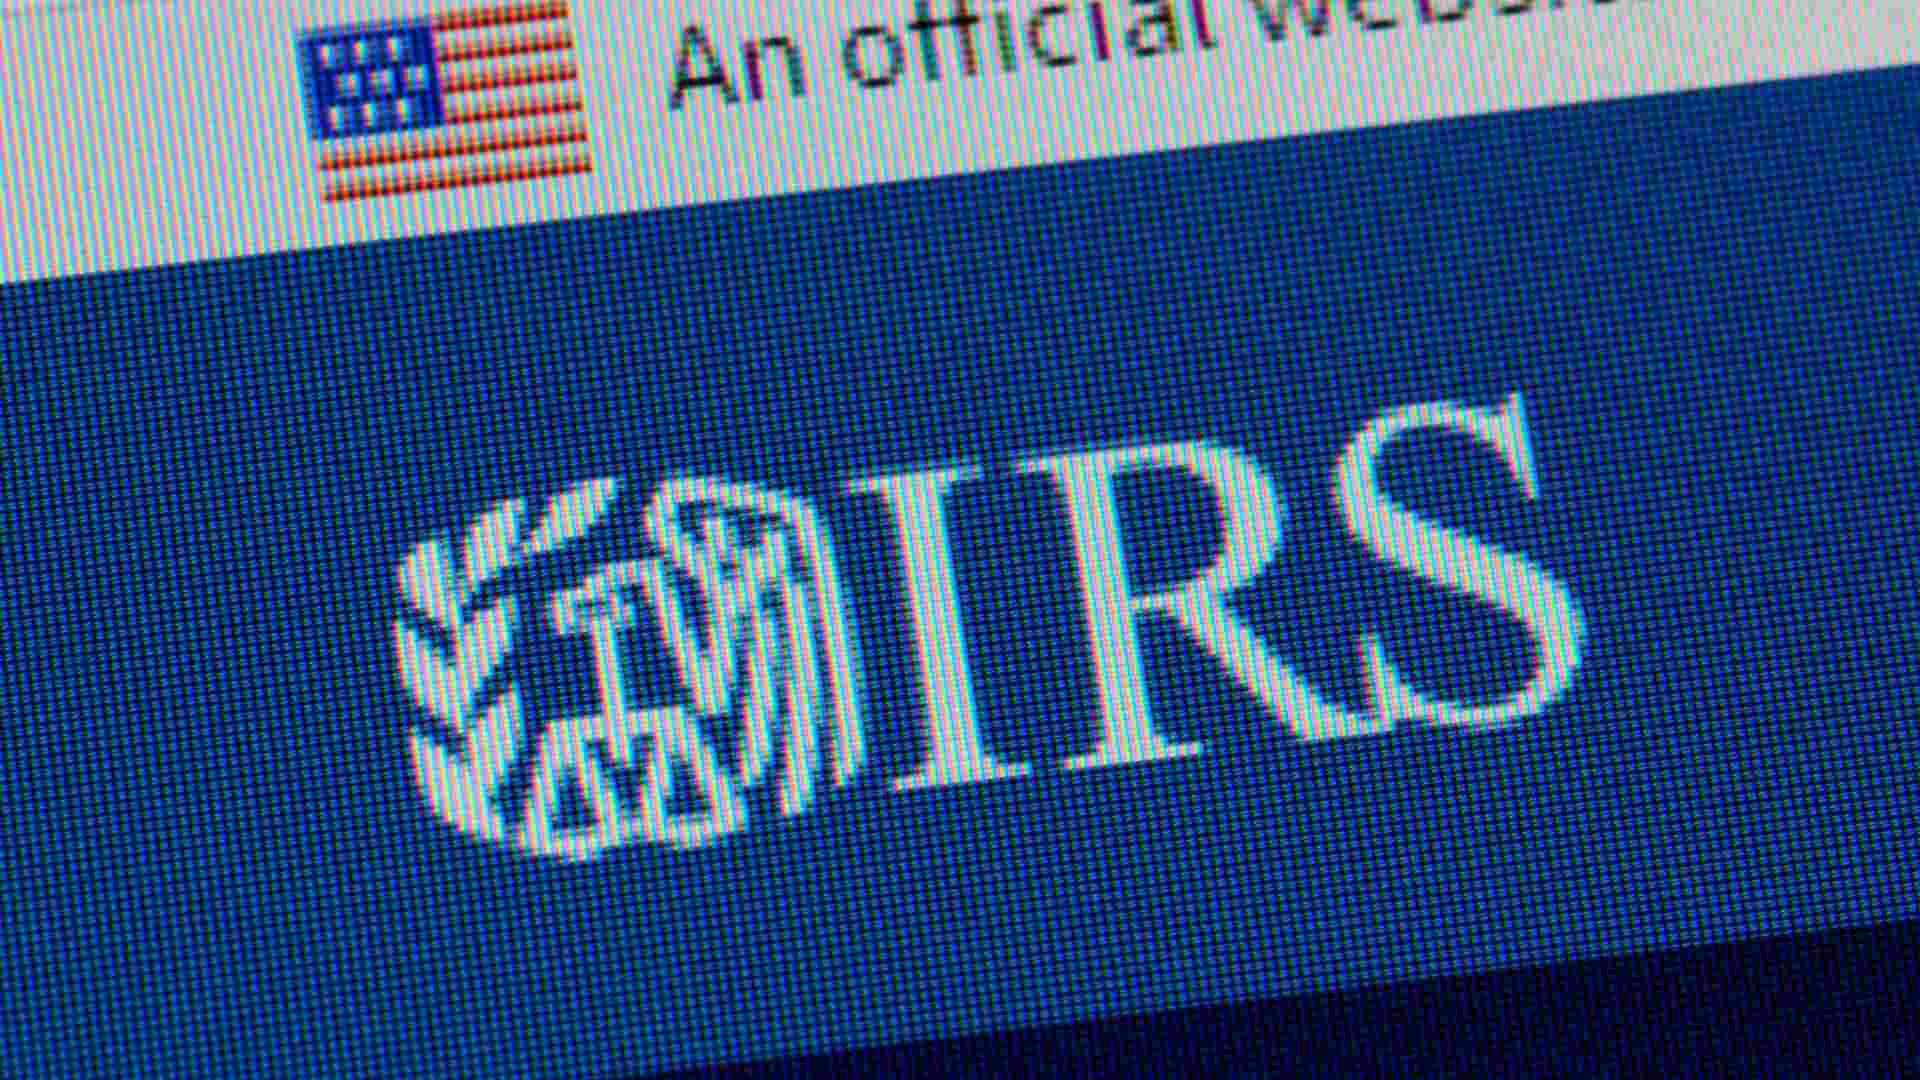 The IRS and the government inform of the latest emails and scams